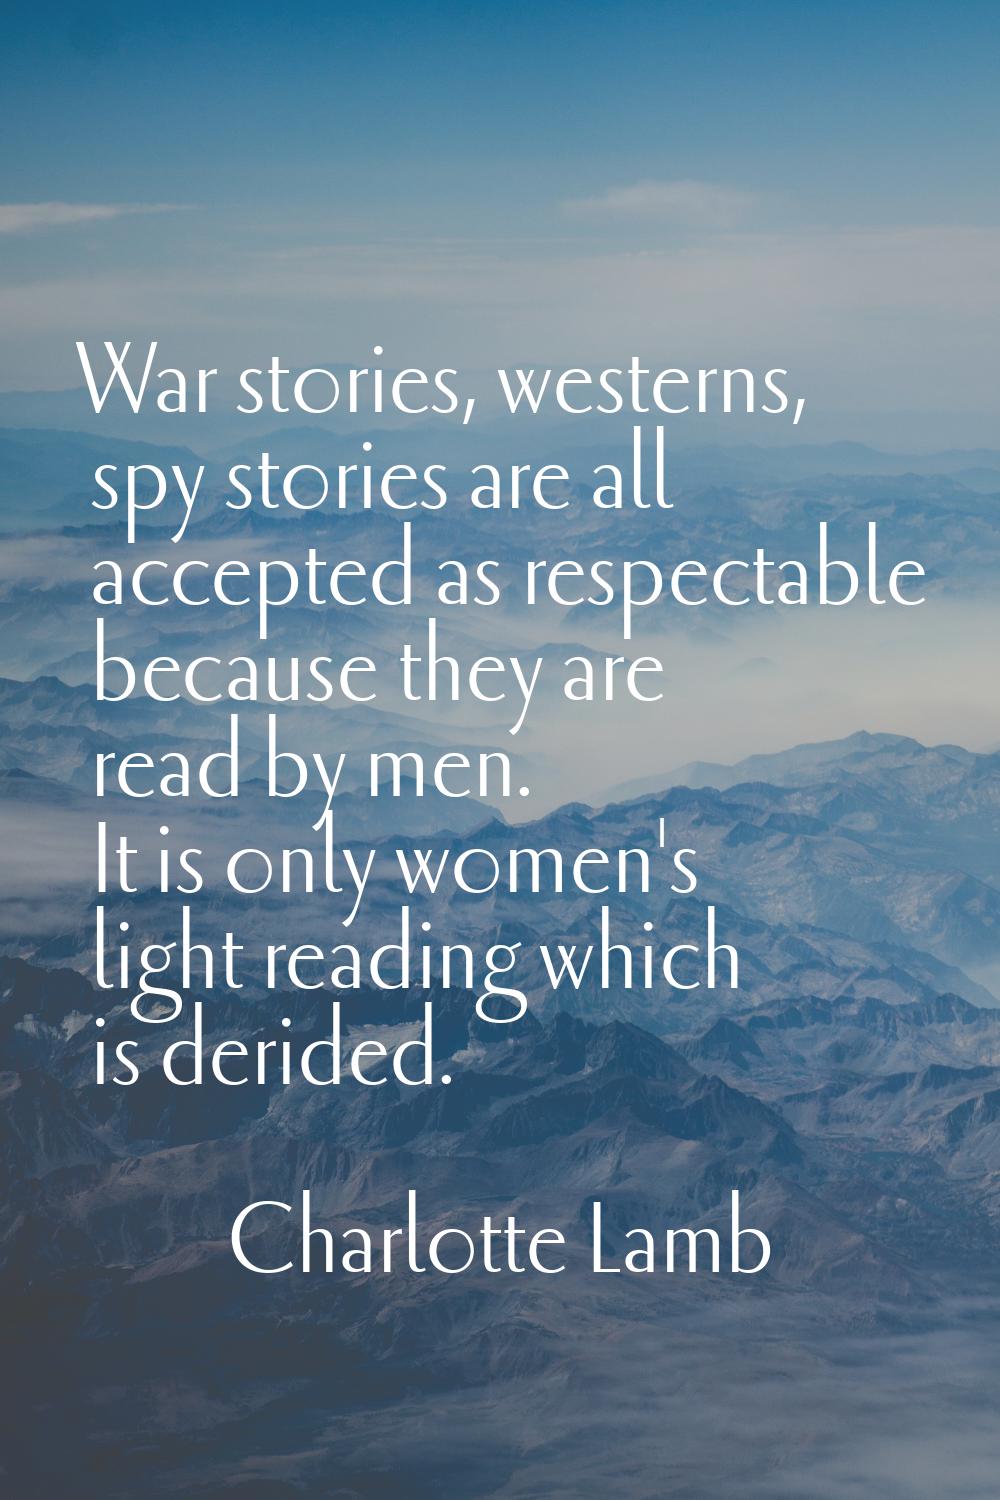 War stories, westerns, spy stories are all accepted as respectable because they are read by men. It